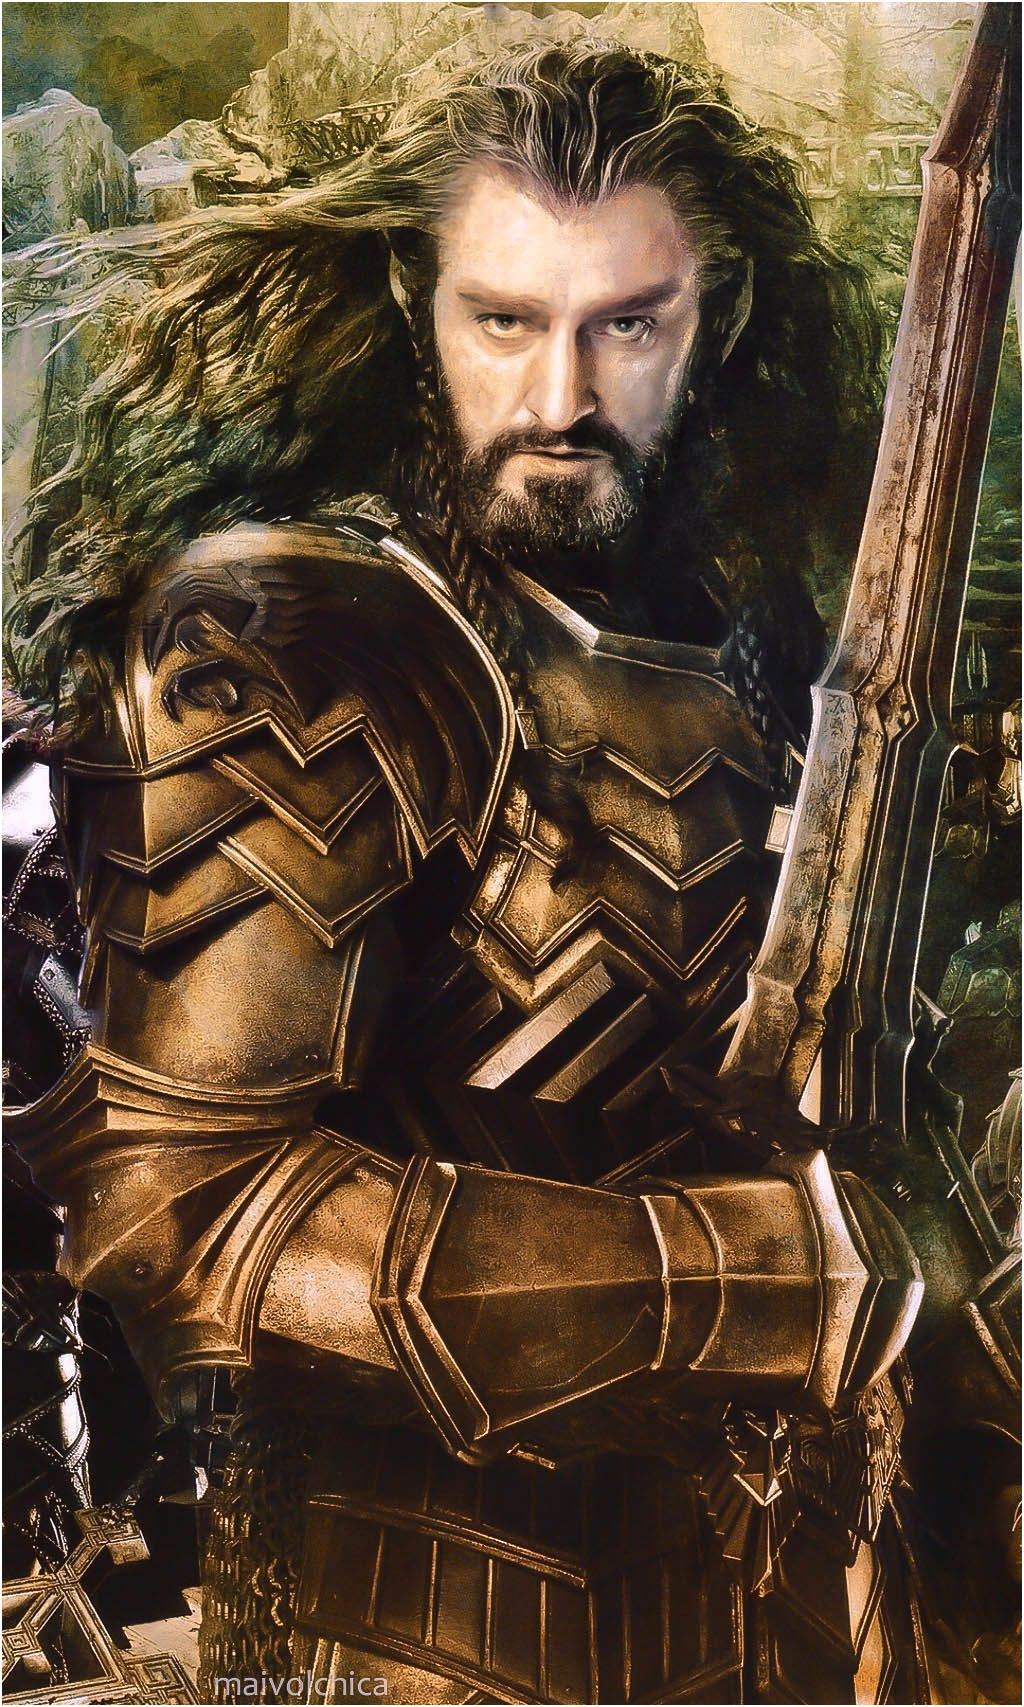 Coloriage Seigneur Des Anneaux Nice Richard Armitage as Thorin Oakenshield In the Hobbit the